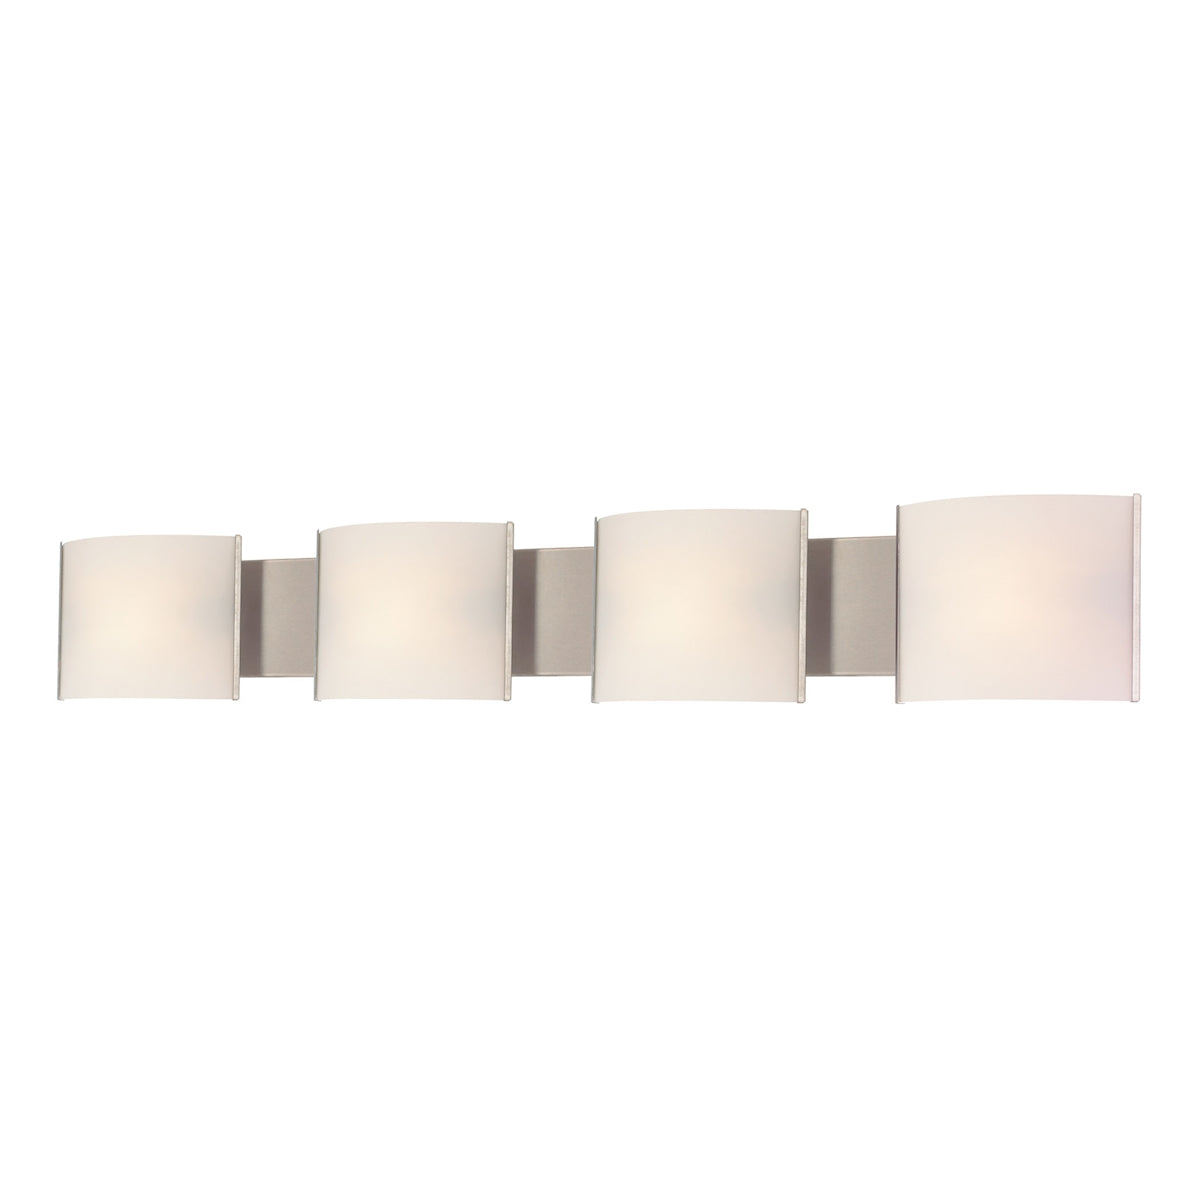 ELK Lighting BV714-10-16 Pannelli 4-Light Vanity Sconce in Stainless Steel with Hand-formed White Opal Glass